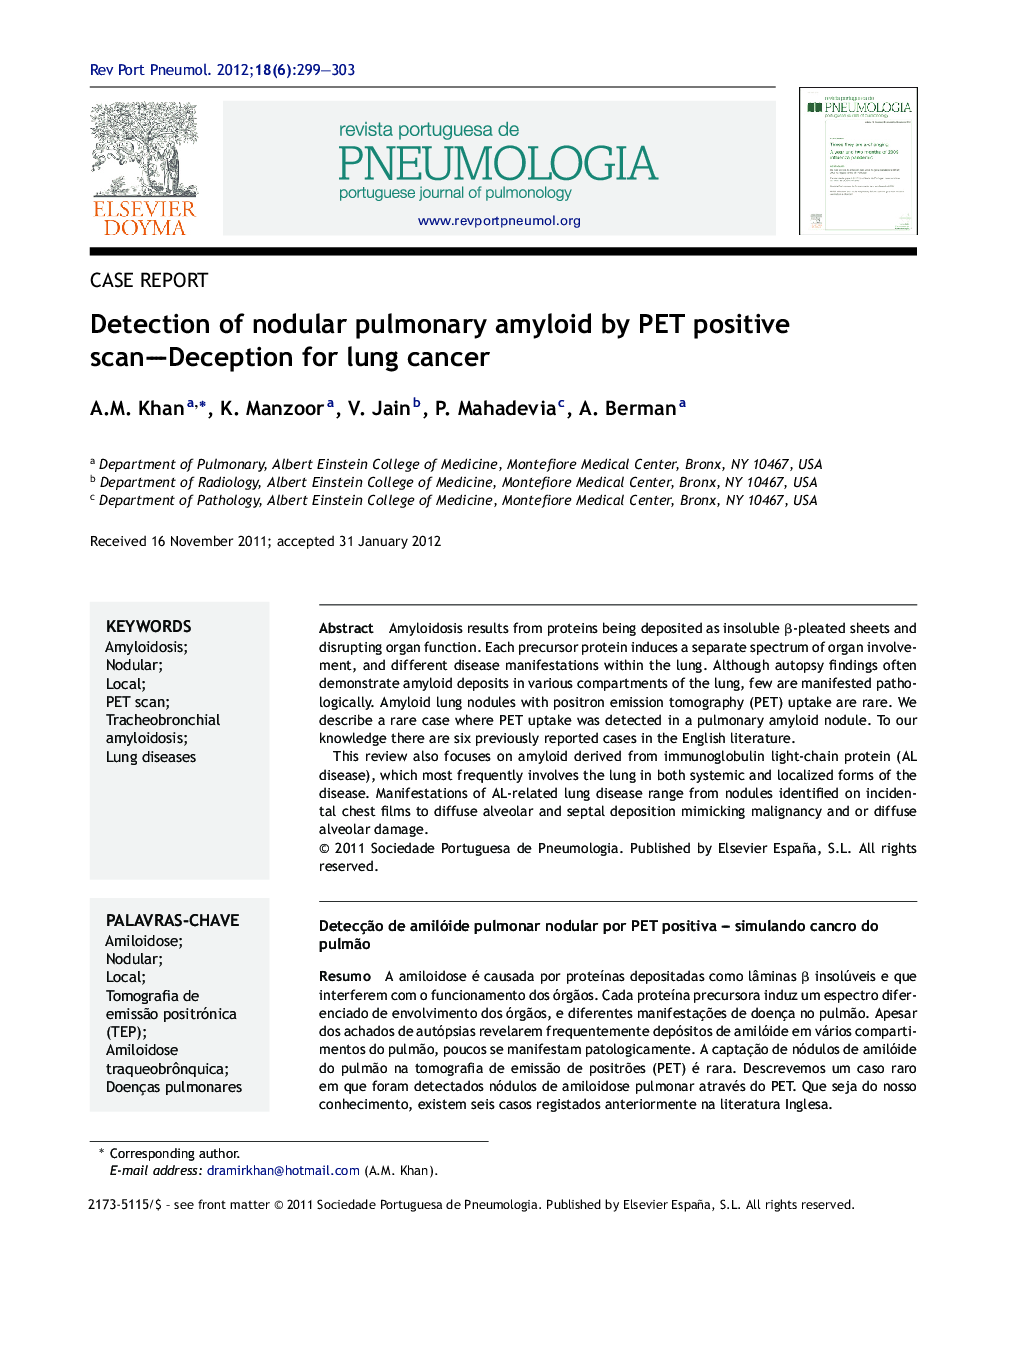 Detection of nodular pulmonary amyloid by PET positive scan—Deception for lung cancer